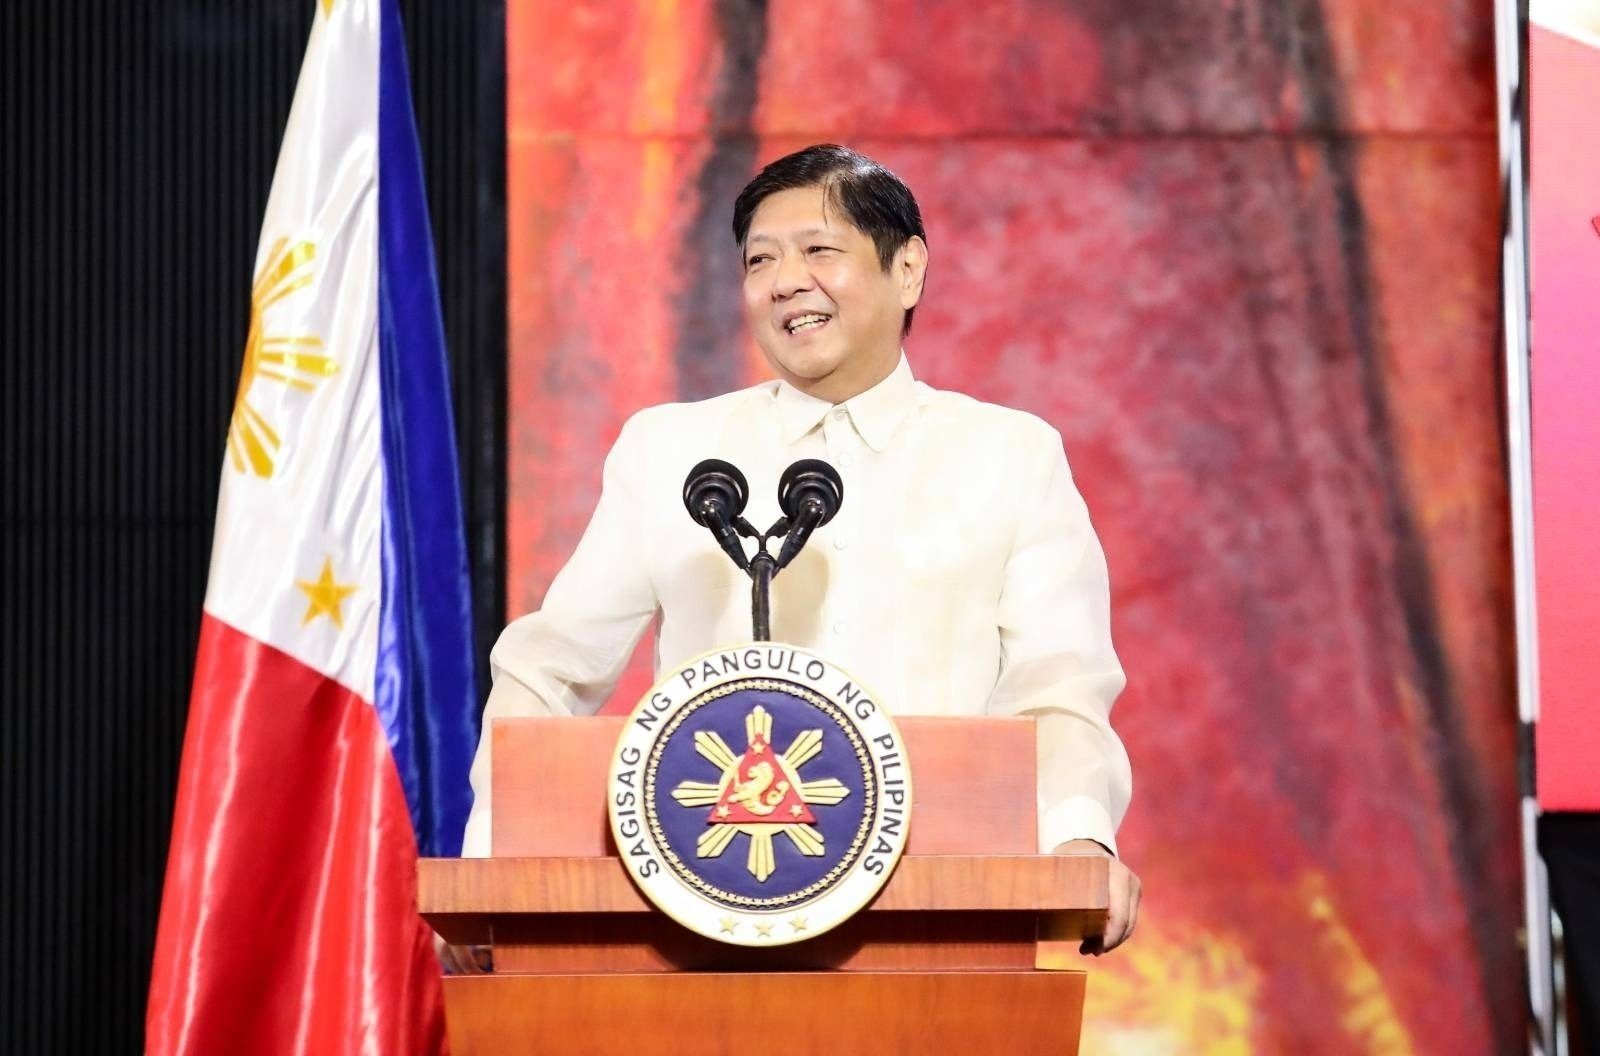 Marcos to meet with Xi Jinping on sidelines of APEC Summit in Thailand